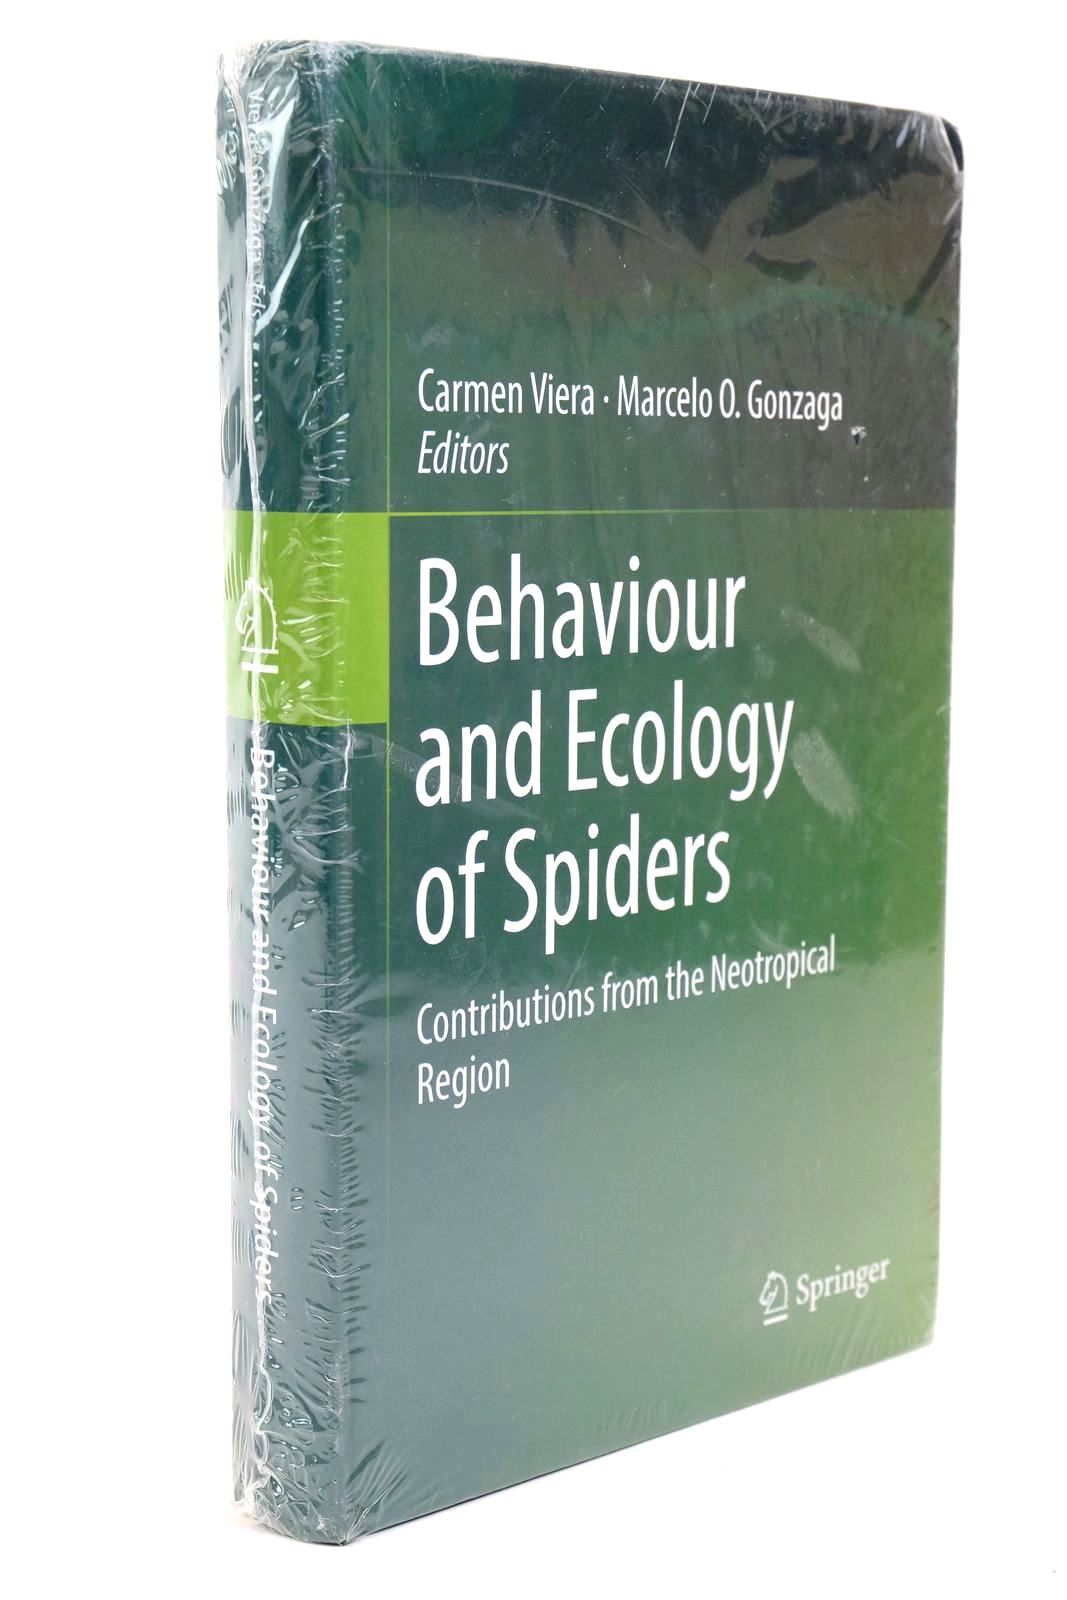 Photo of BEHAVIOUR AND ECOLOGY OF SPIDERS- Stock Number: 1323036